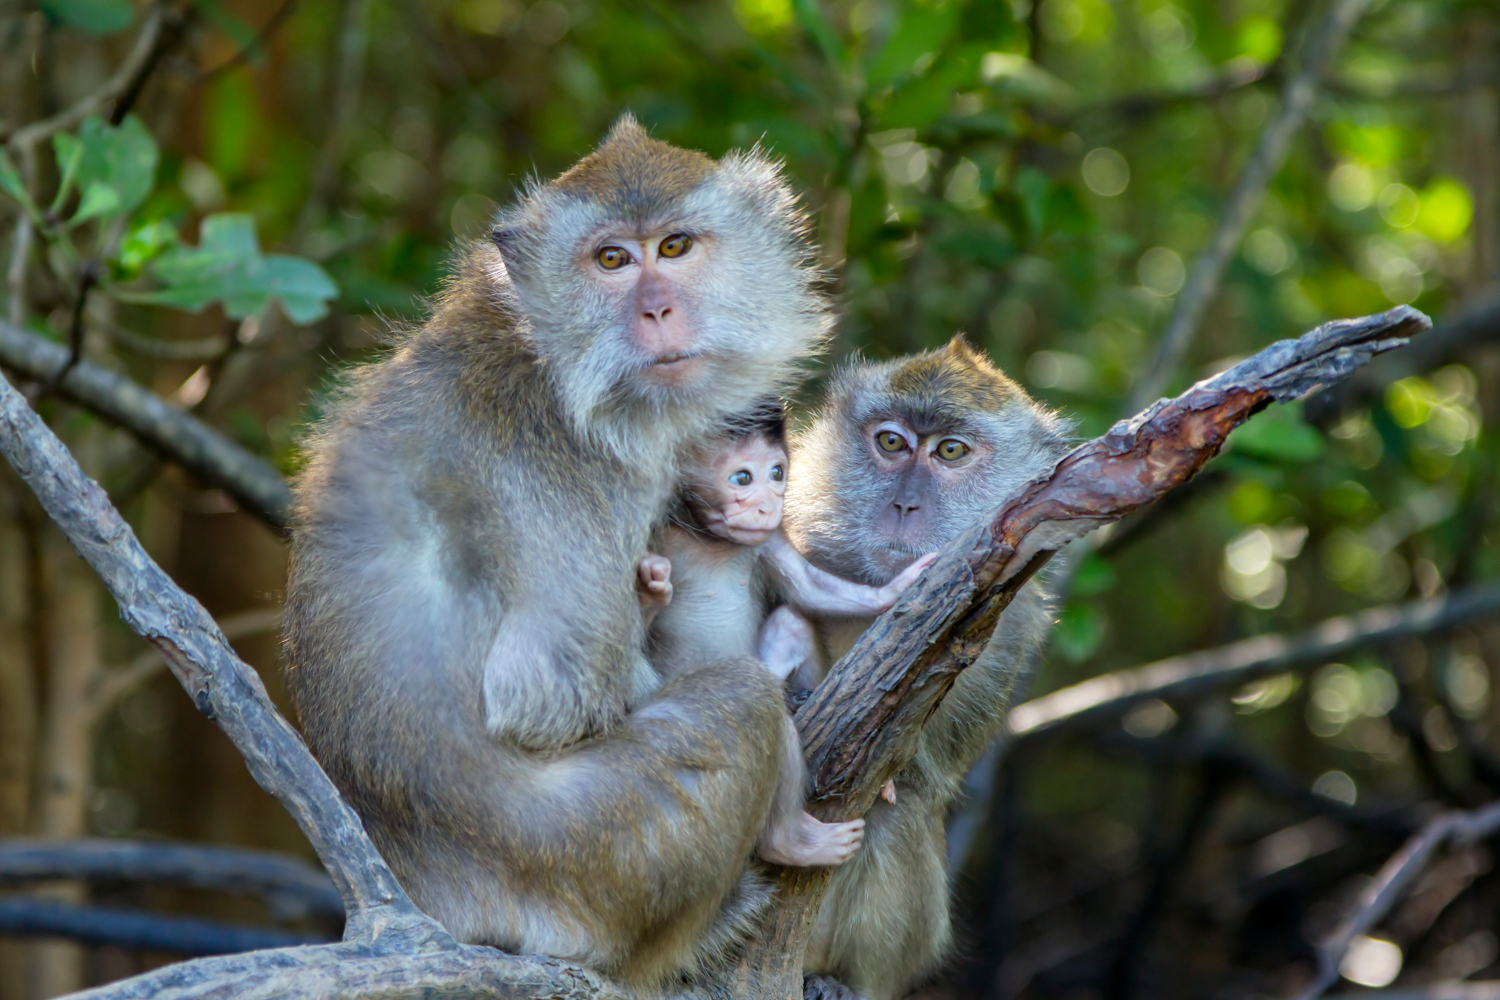 Macaque monkeys in mangrove forests of Langkawi © VasukiRao / iStock / Getty Images